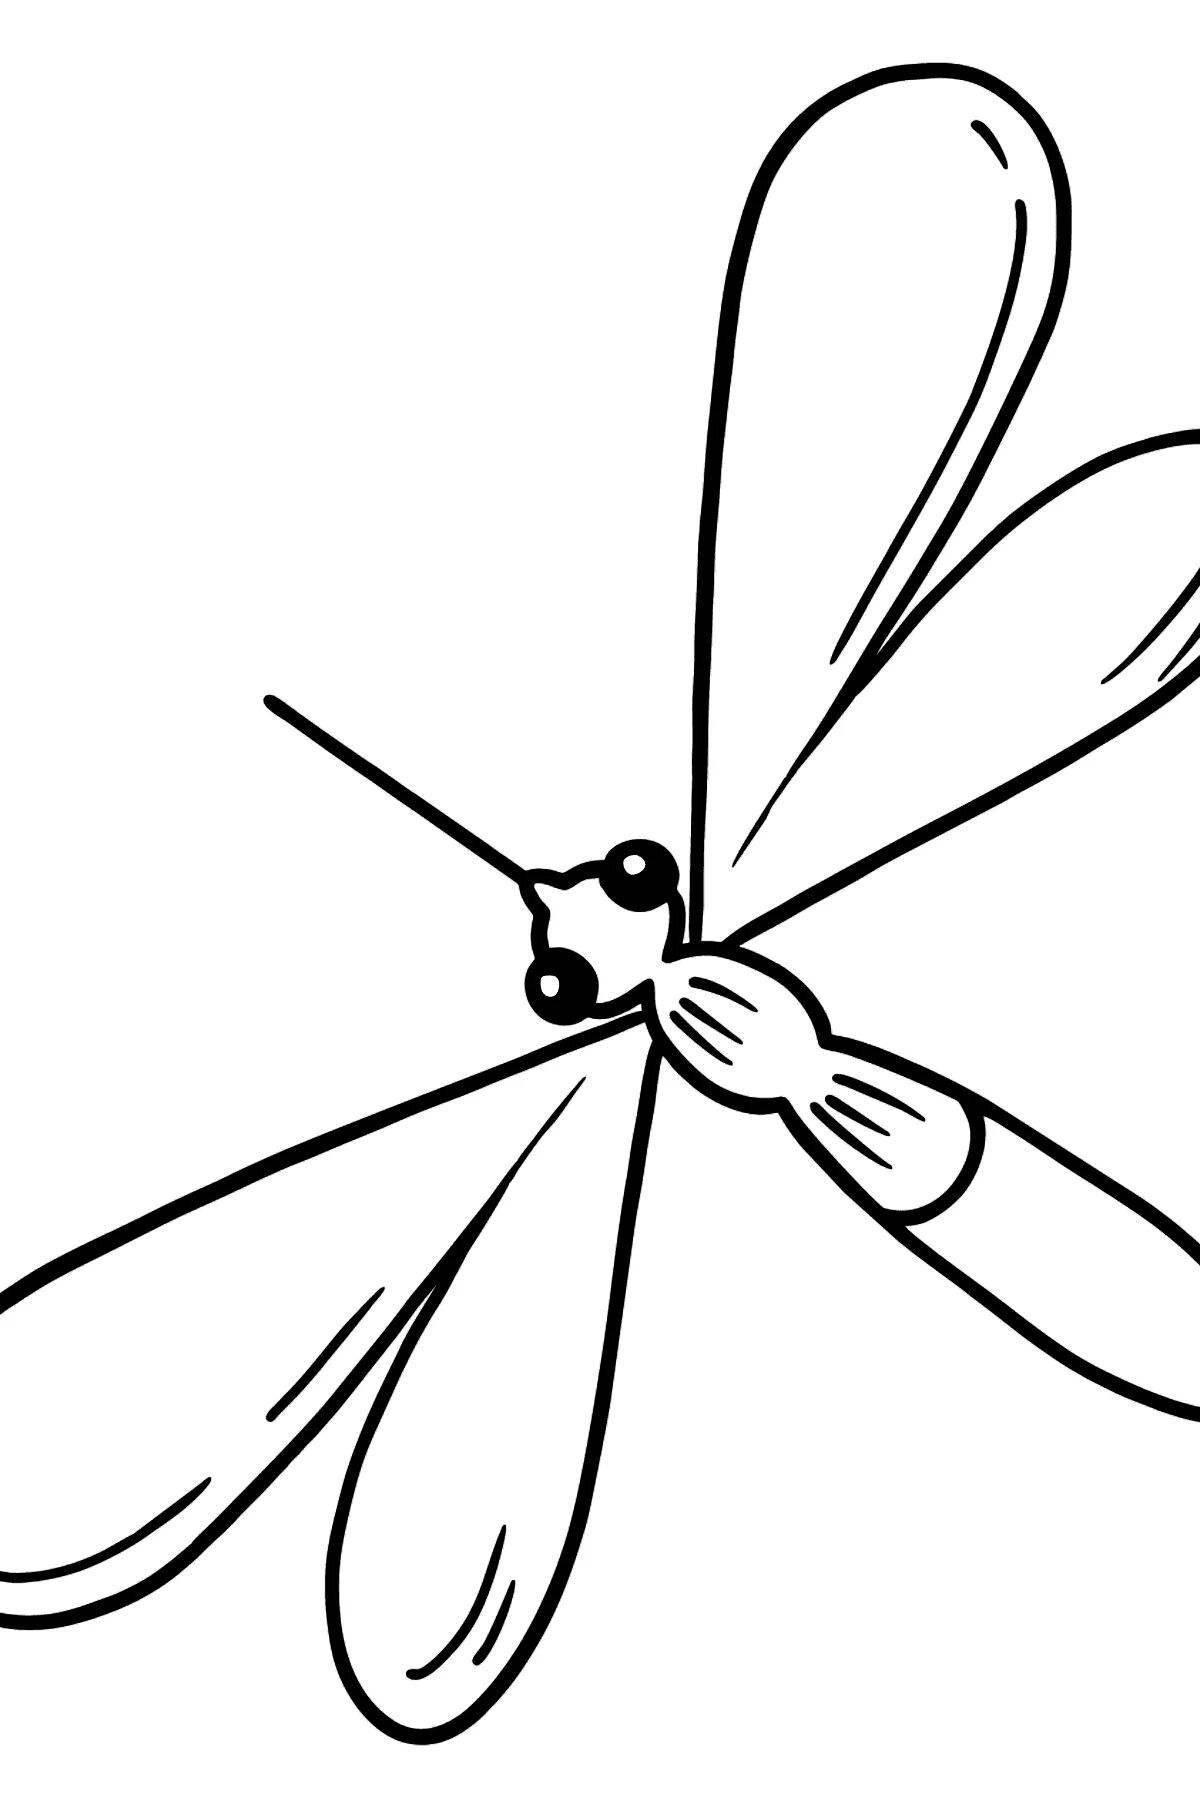 Sweet mosquito coloring page